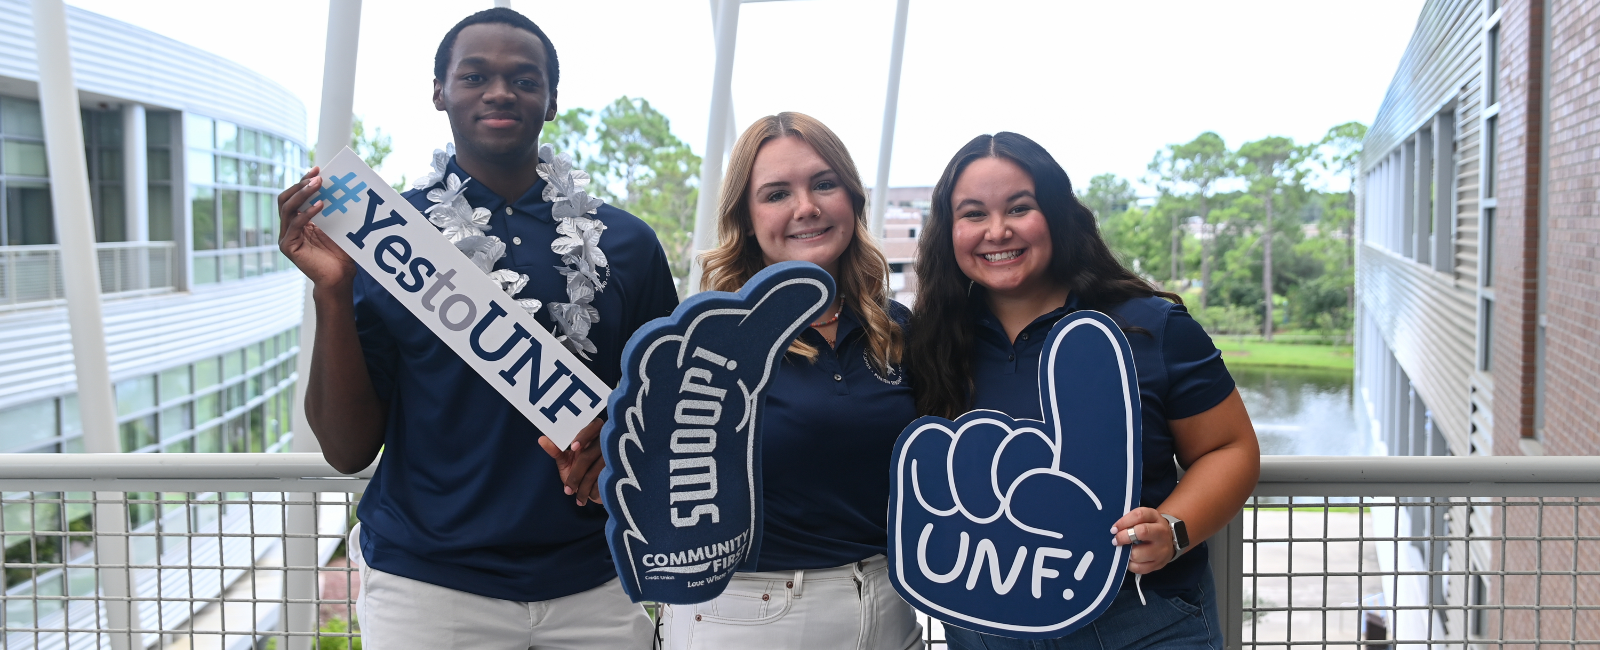 Three admissions counselors holding UNF foam fingers and smiling while standing outside